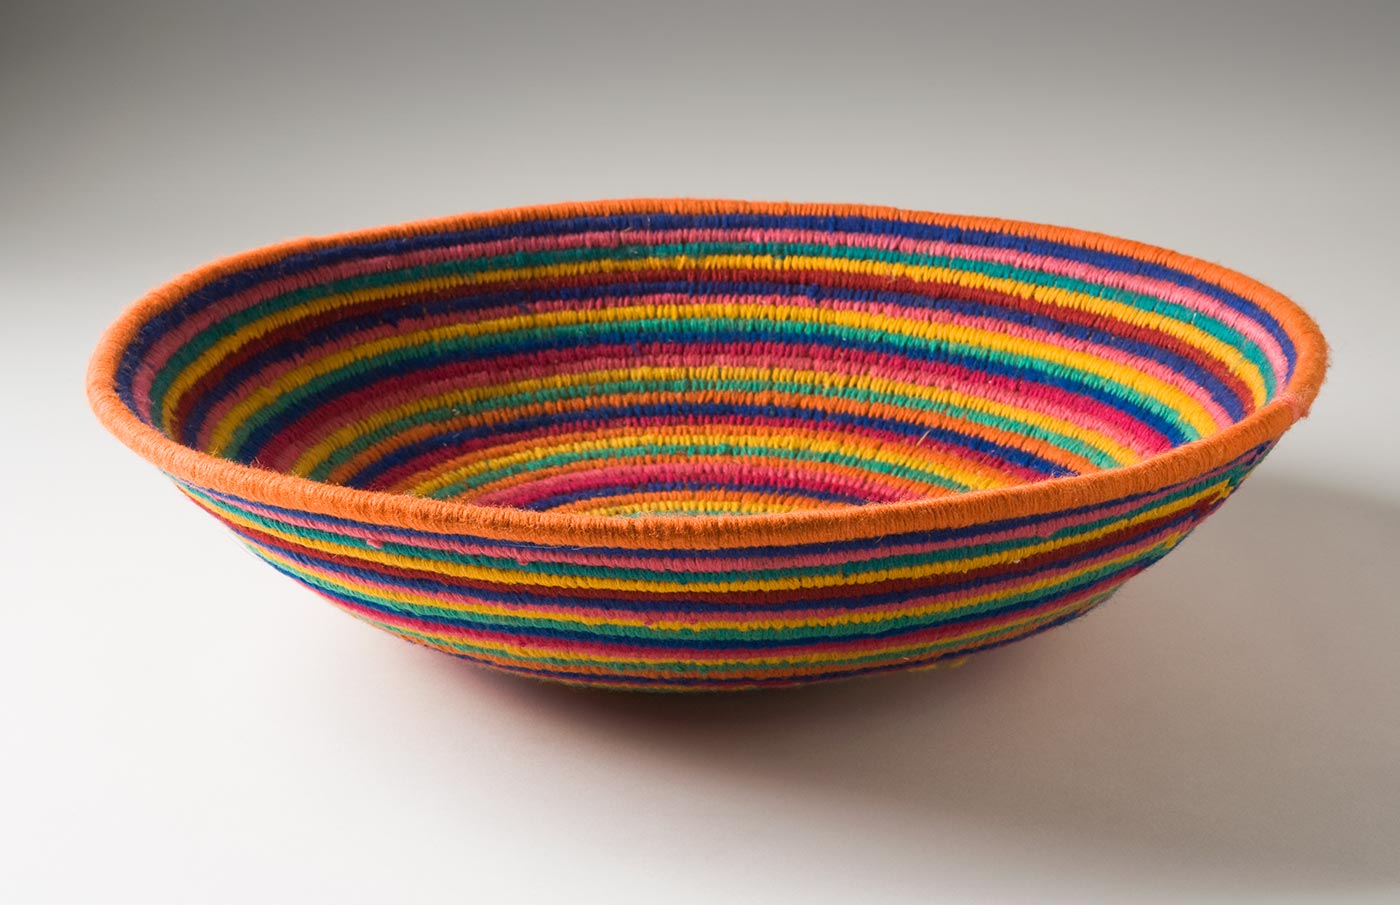 A multicoloured circular coiled yarn and plant fibre bowl-shaped basket. The centre of the basket is in pale pink yarn followed by horizontal stripes of yarn in lavender, pink, green, yellow, orange, blue and dark pink. - click to view larger image